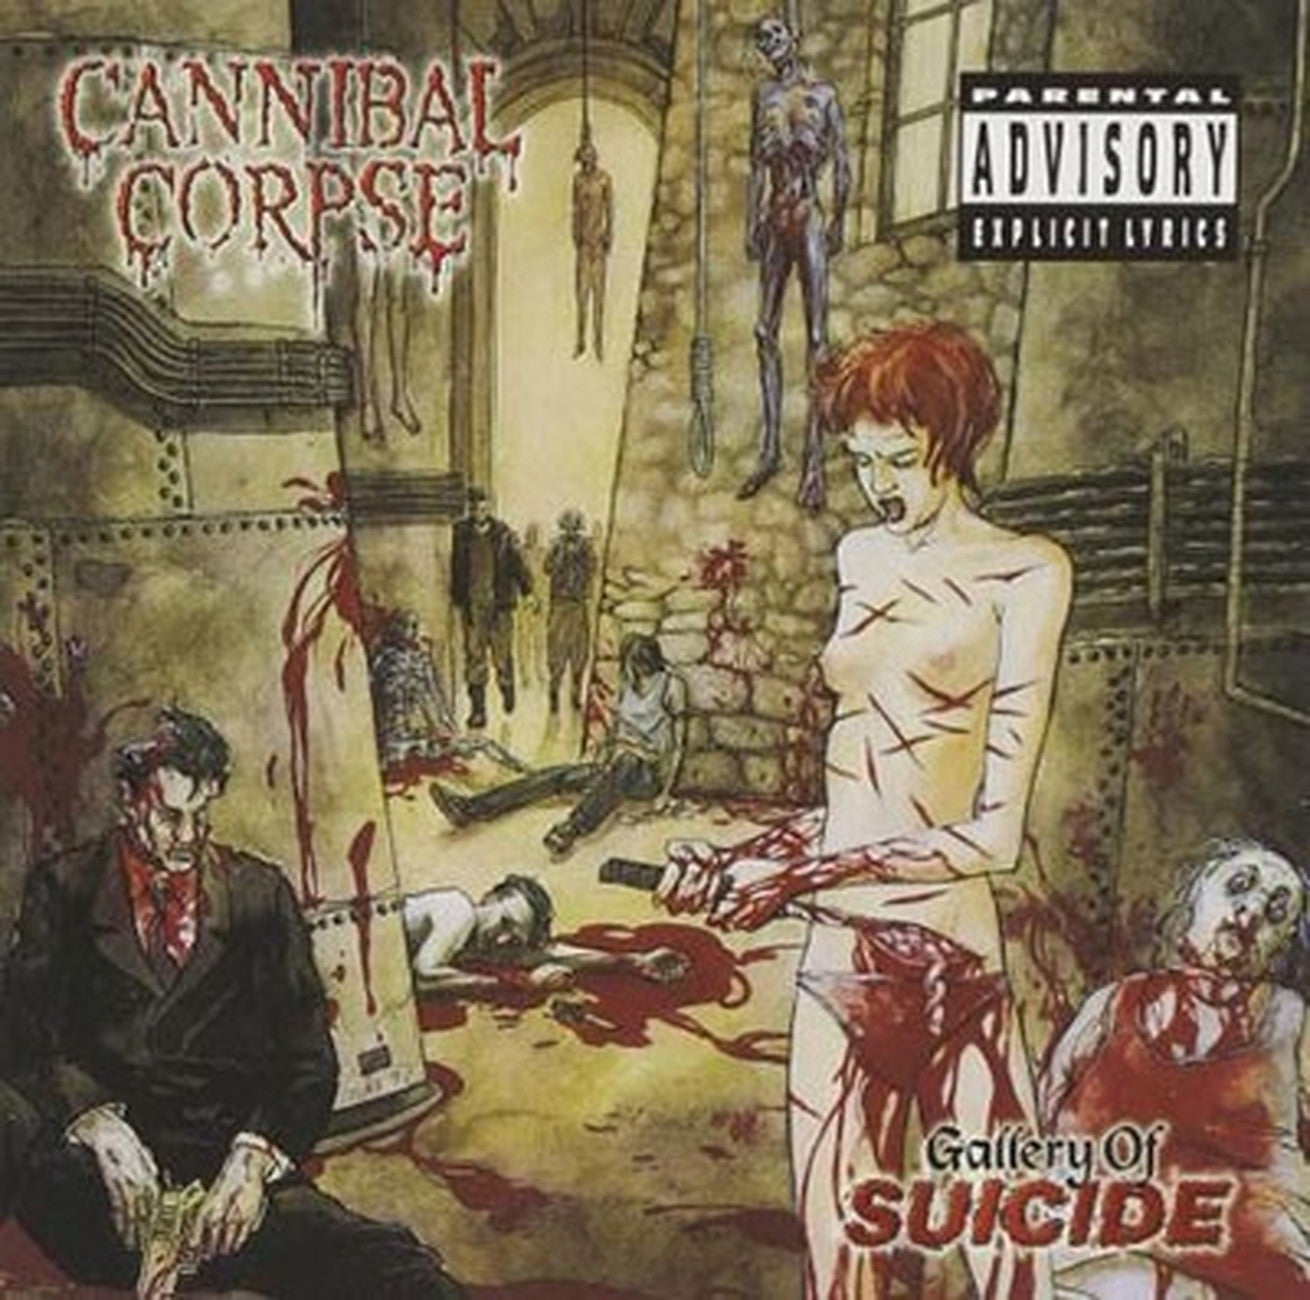 Cannibal Corpse - Gallery Of Suicide - Japan CD